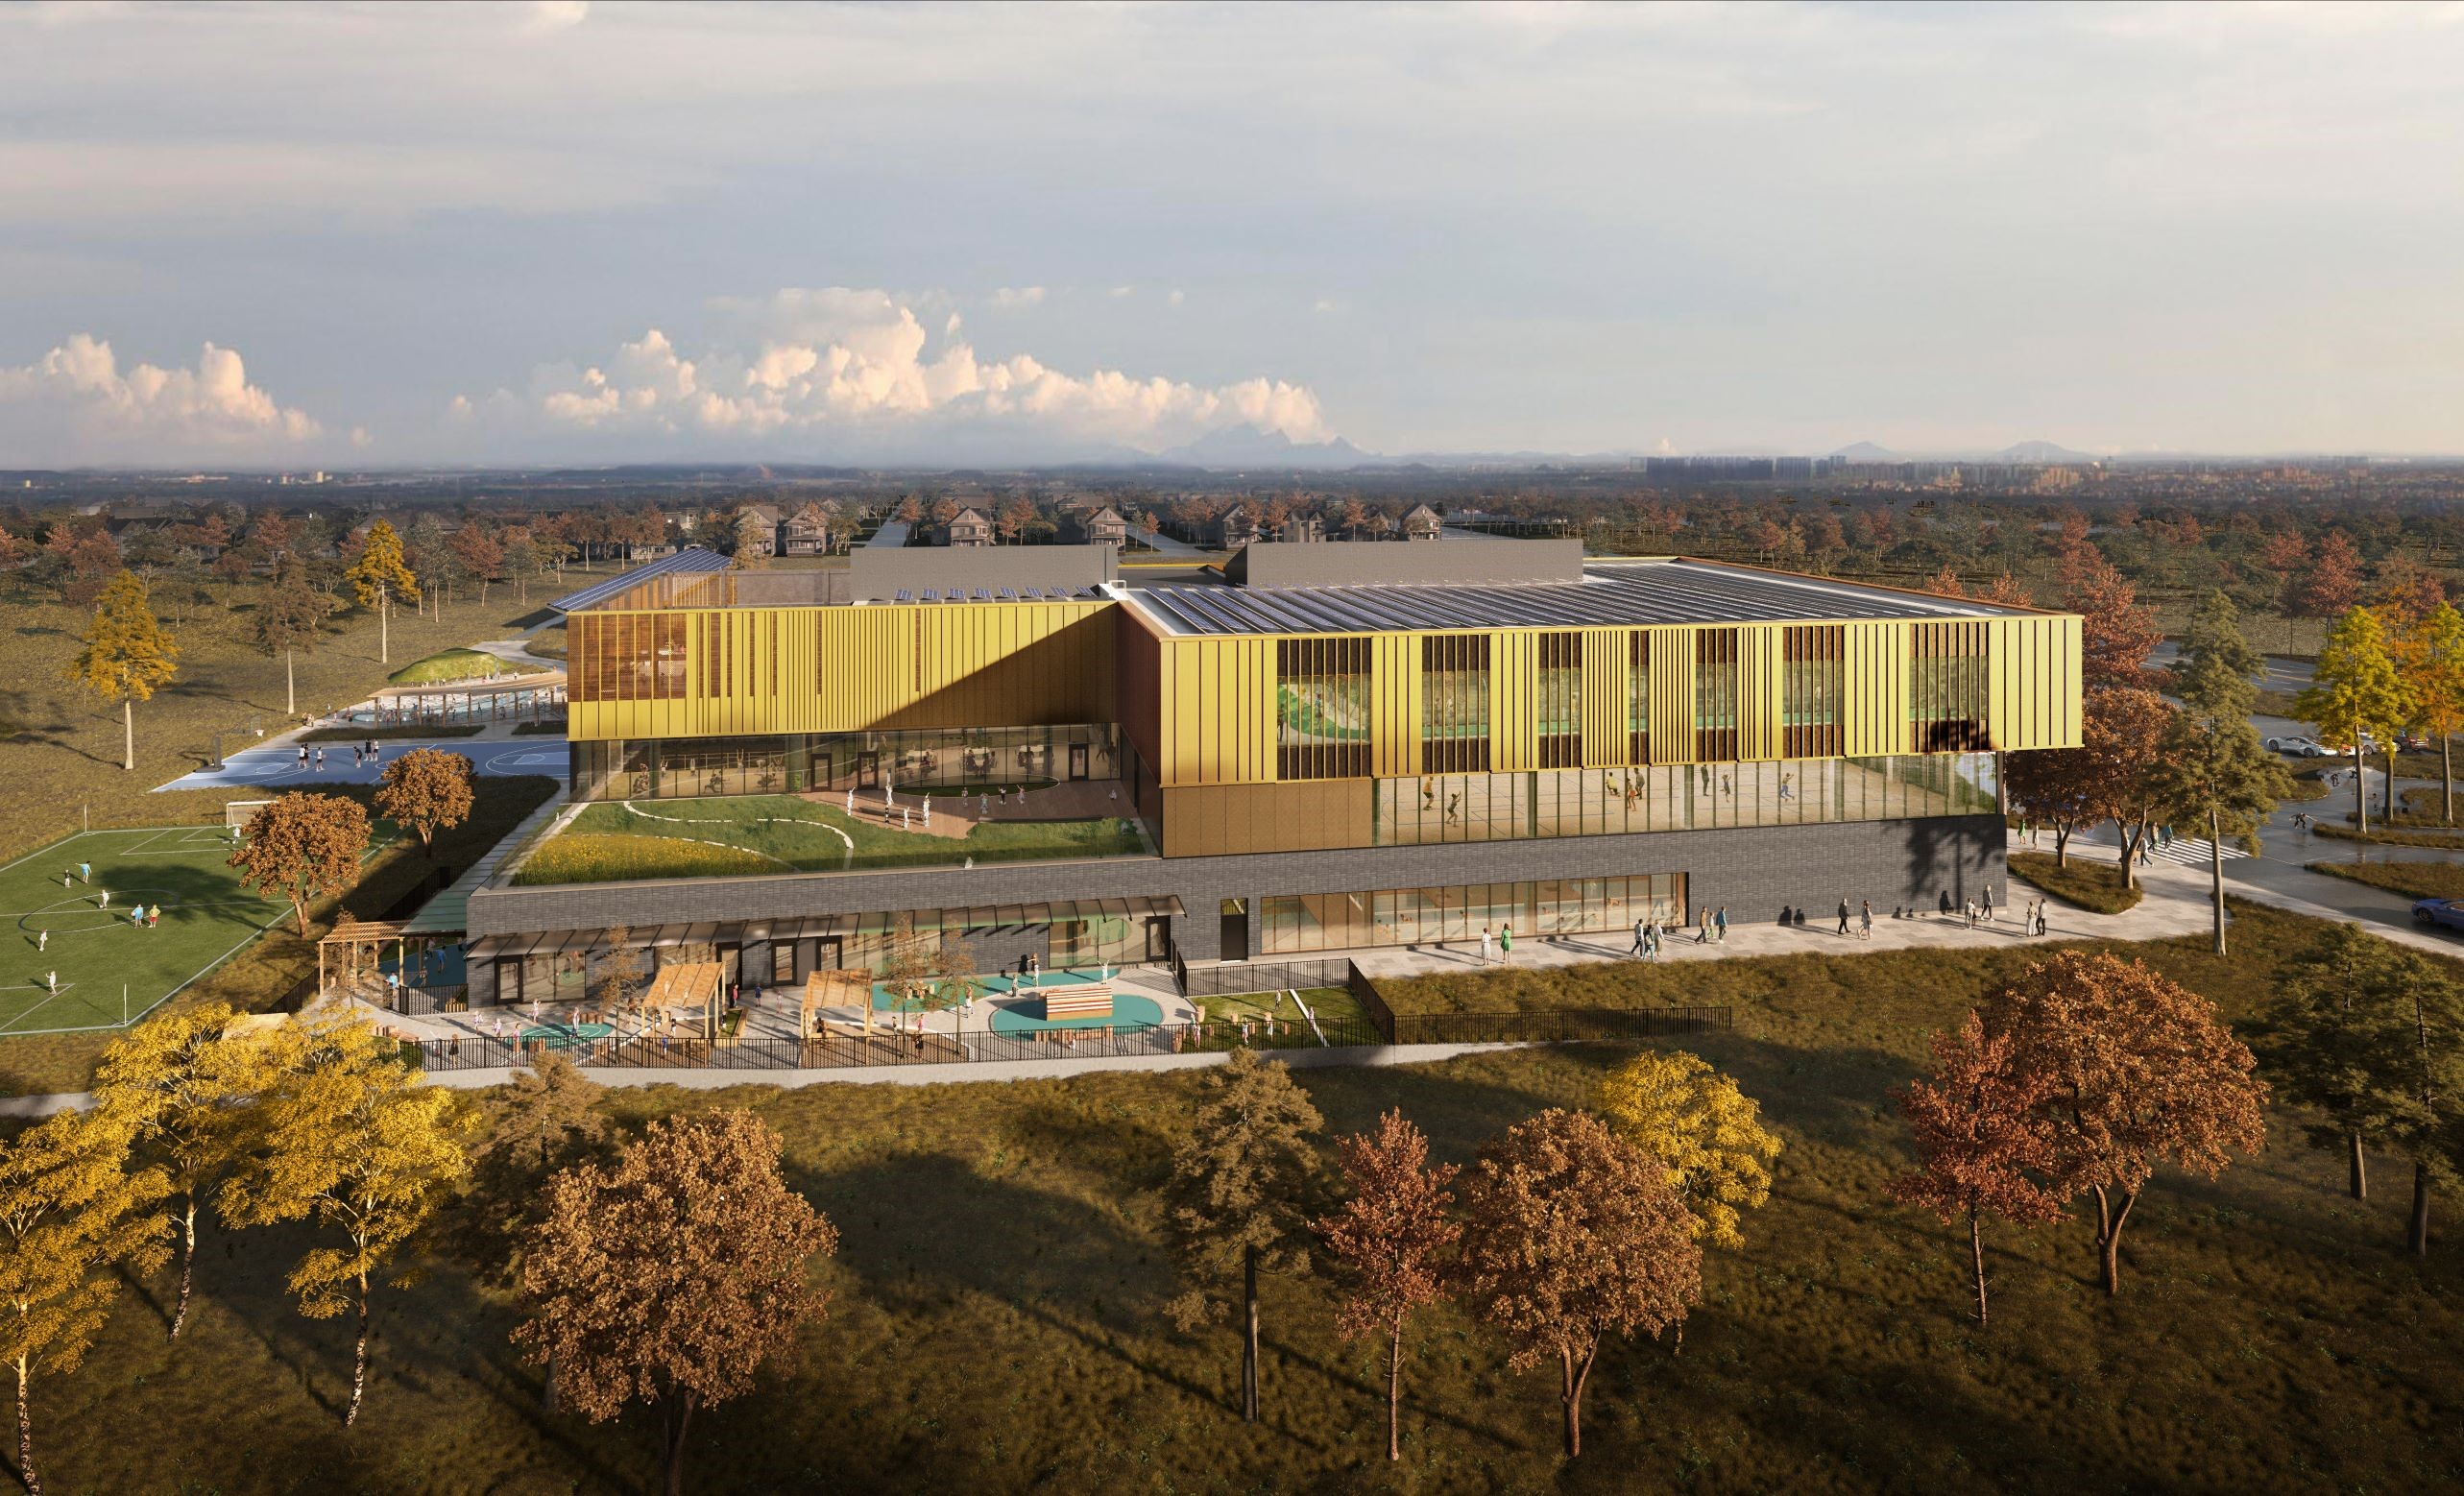 A aerial rendering of the exterior of the new North East Scarborough Community and Child Care Centre taken at a distance from the west. The image shows the area surrounding the new facility, which includes grass and mature trees.